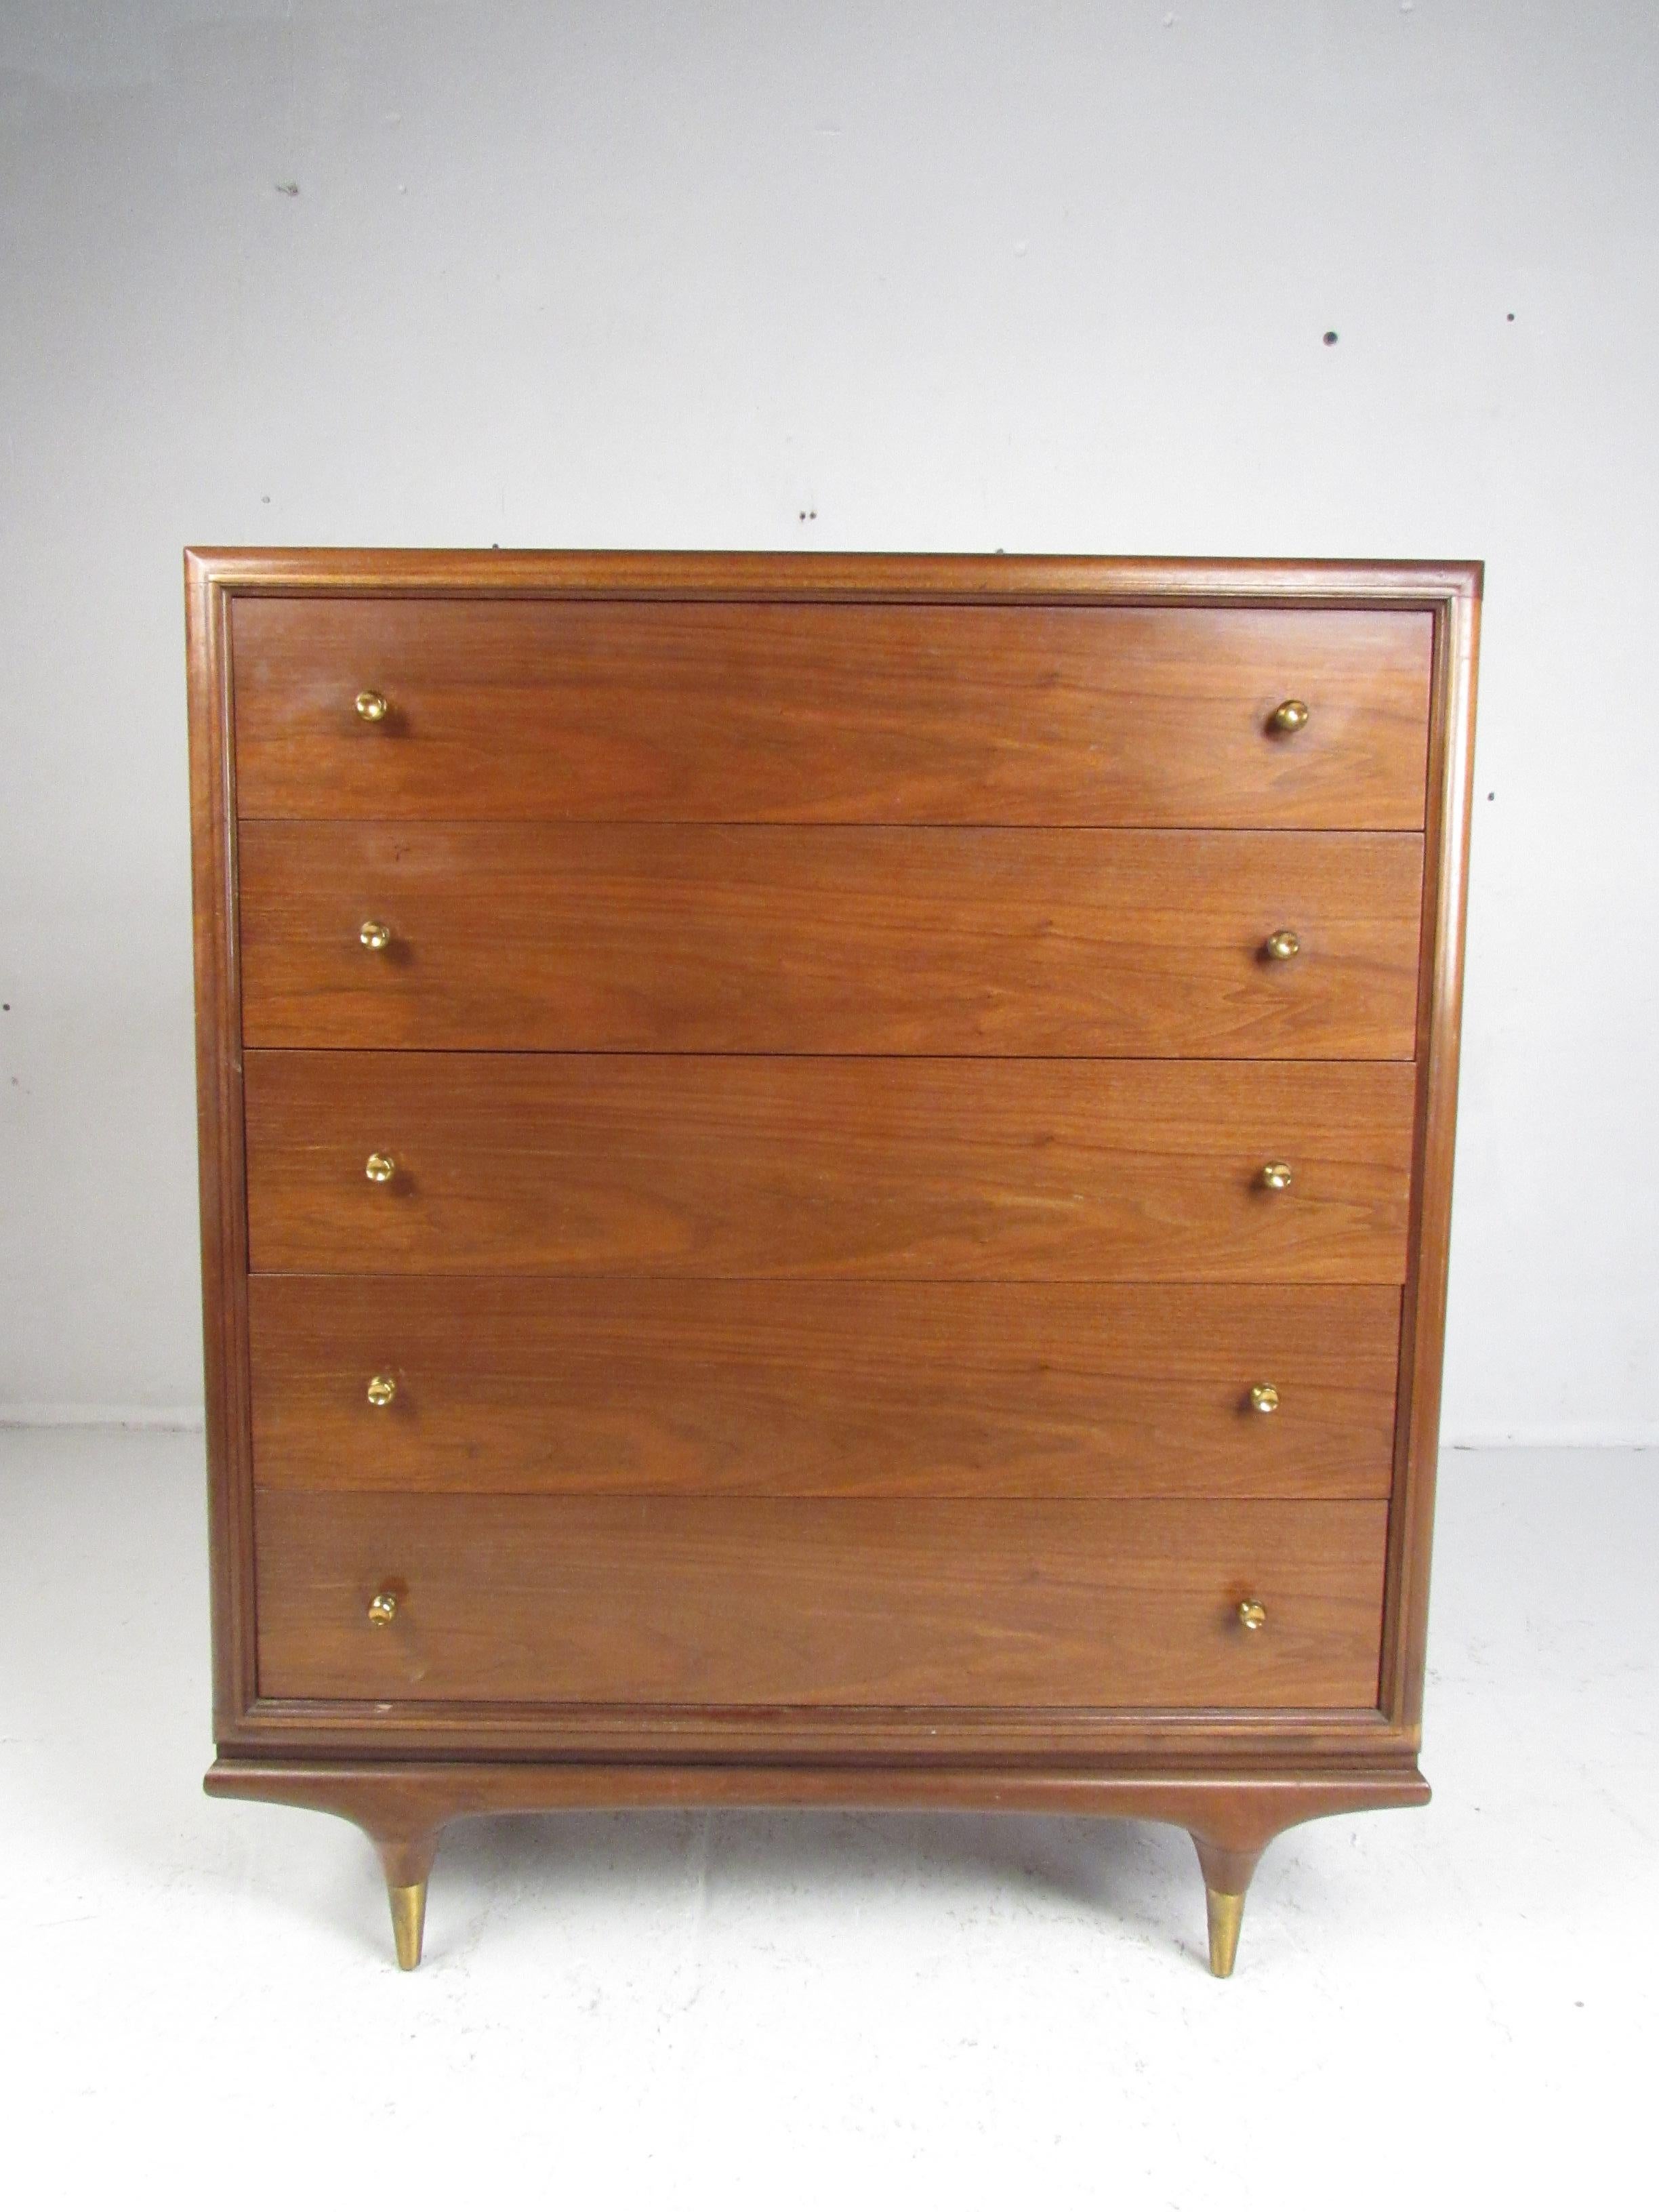 This stunning Mid-Century Modern dresser by Kent Coffey features five hefty drawers ensuring plenty of room for storage. A well constructed piece that sits on four stubby tapered legs with brass capped feet. The straight lines, elegant walnut wood